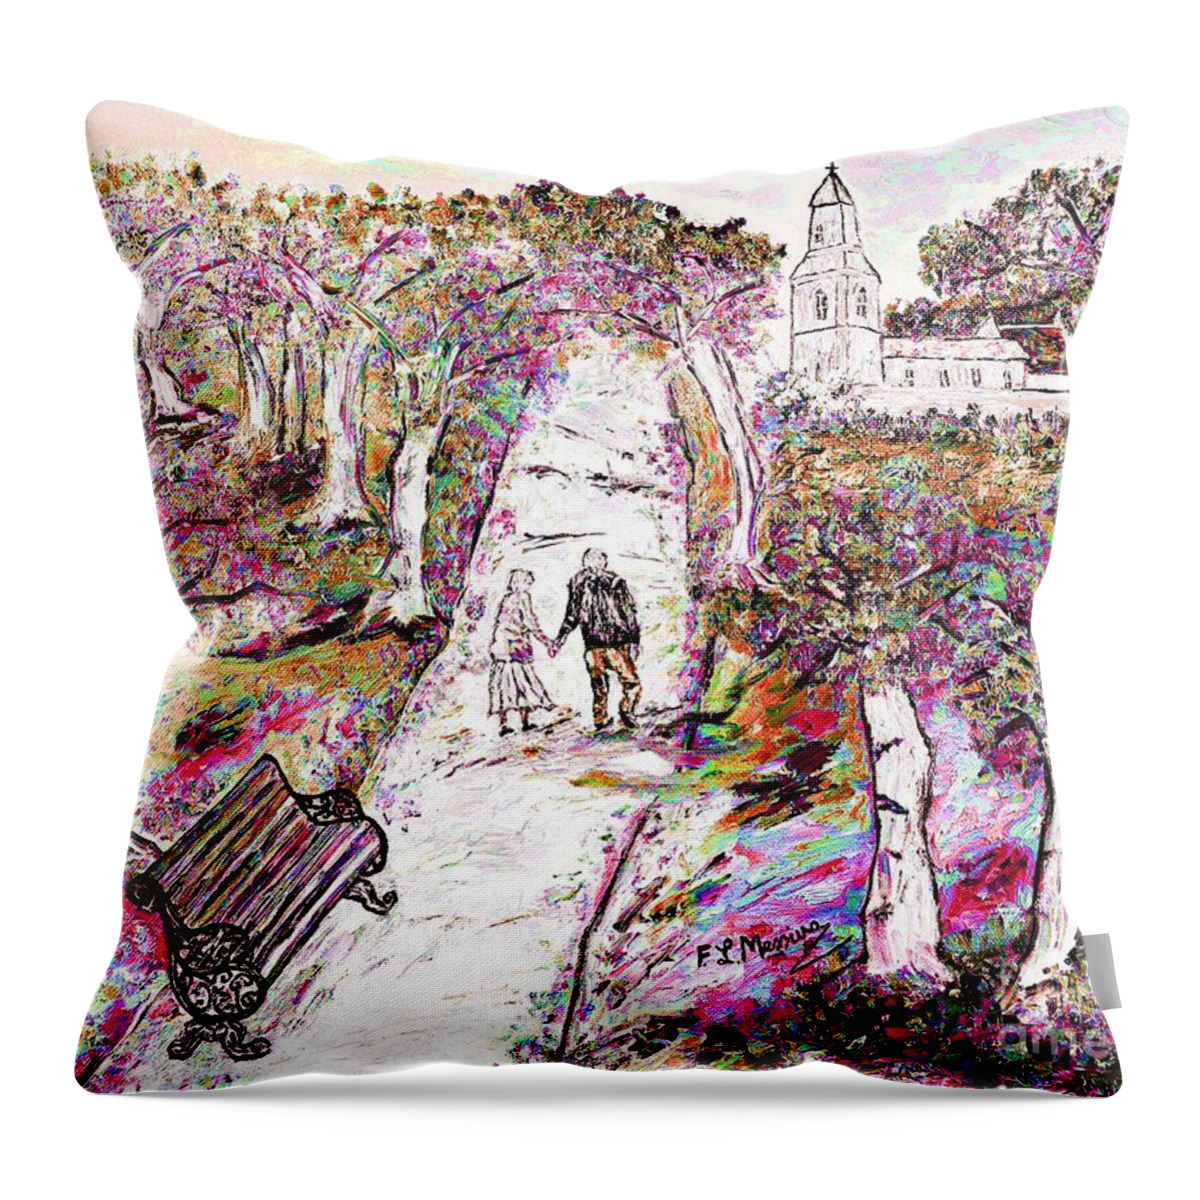 Mixed Media Throw Pillow featuring the painting A stroll in autumn by Loredana Messina